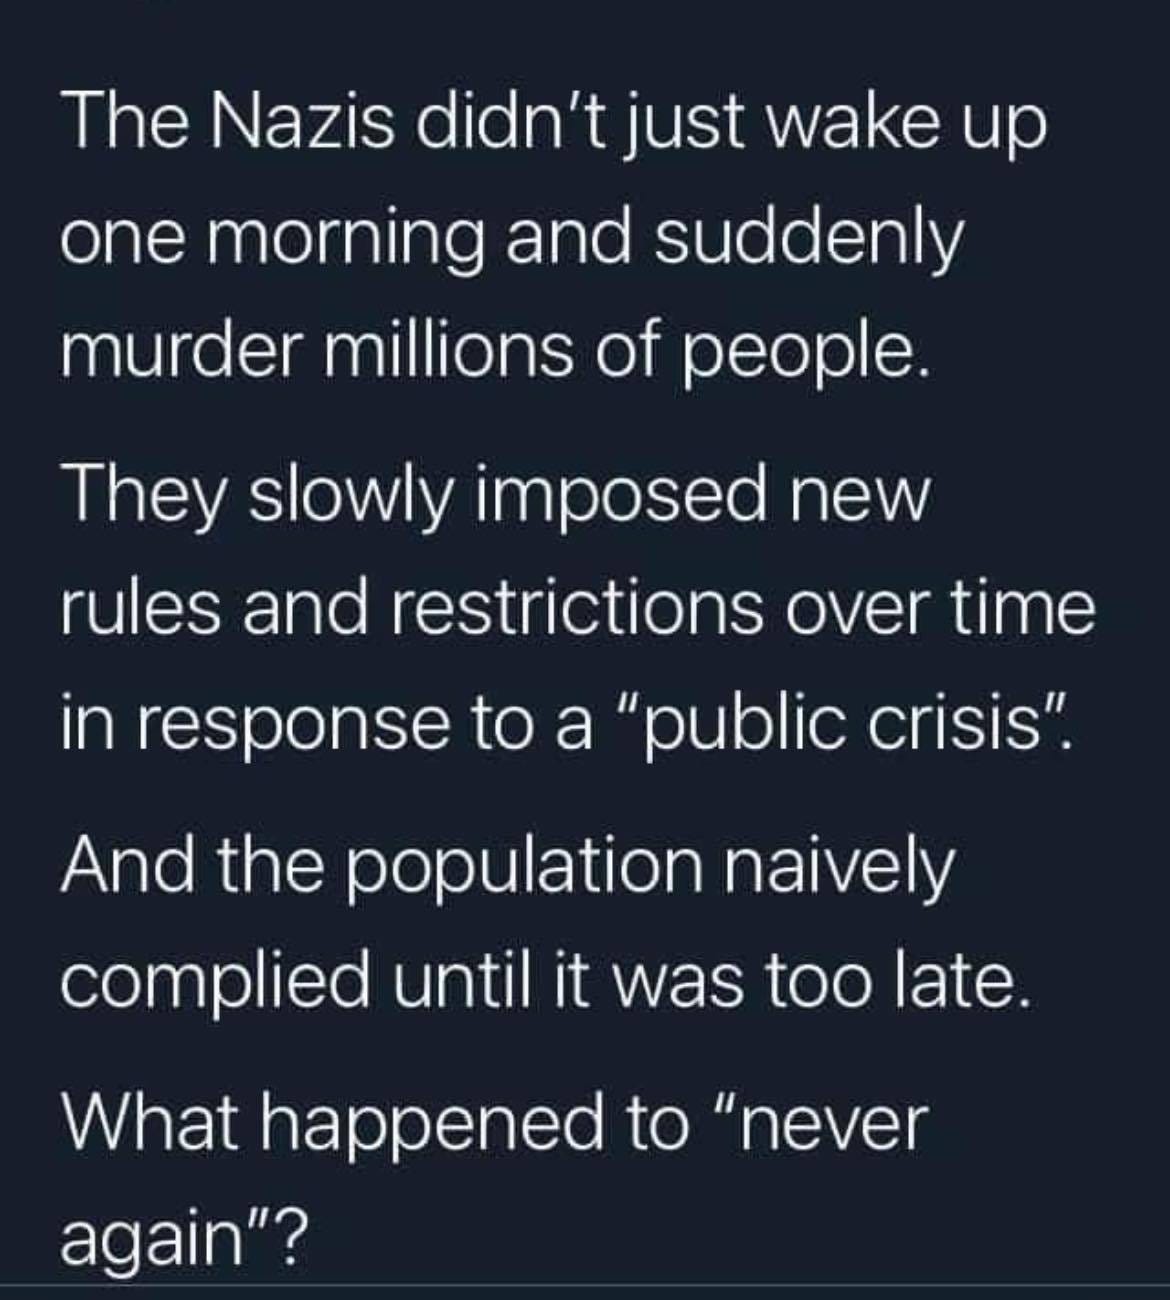 May be an image of one or more people and text that says "The Nazis didn't just wake up one morning and suddenly murder millions of people. They slowly imposed new rules and restrictions over time in response to a "public crisis". And the population naively complied until it was too late. What happened to "never again"?"